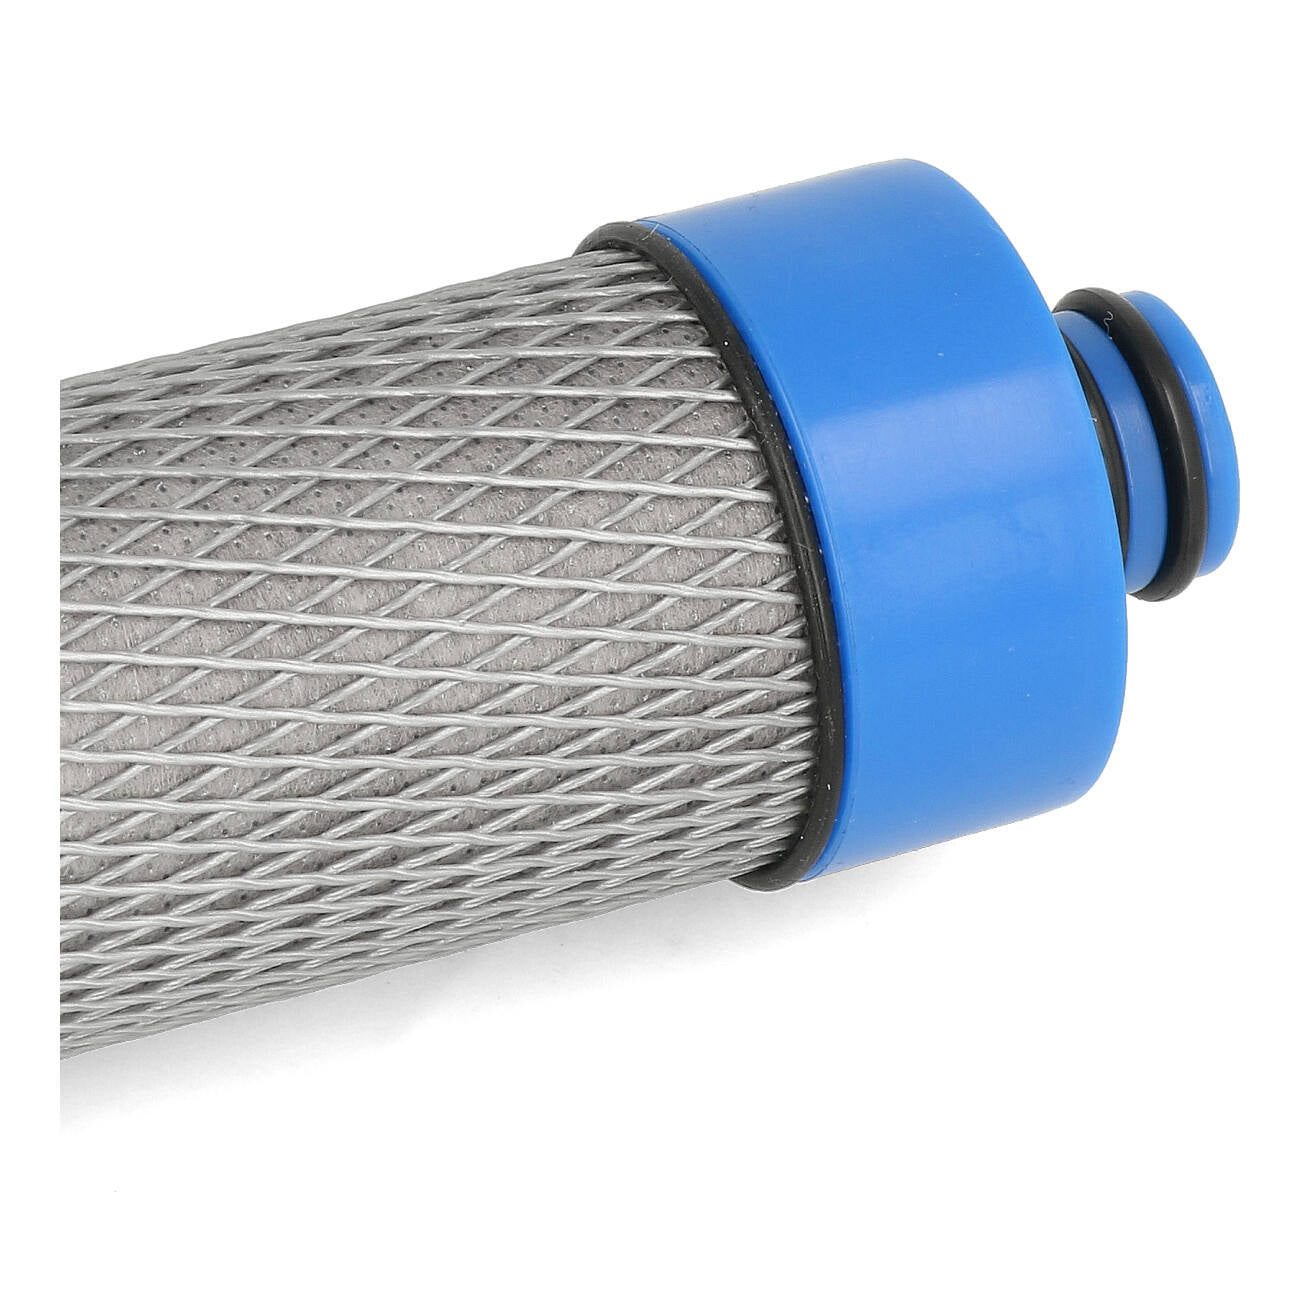 Reinguard activated carbon filter